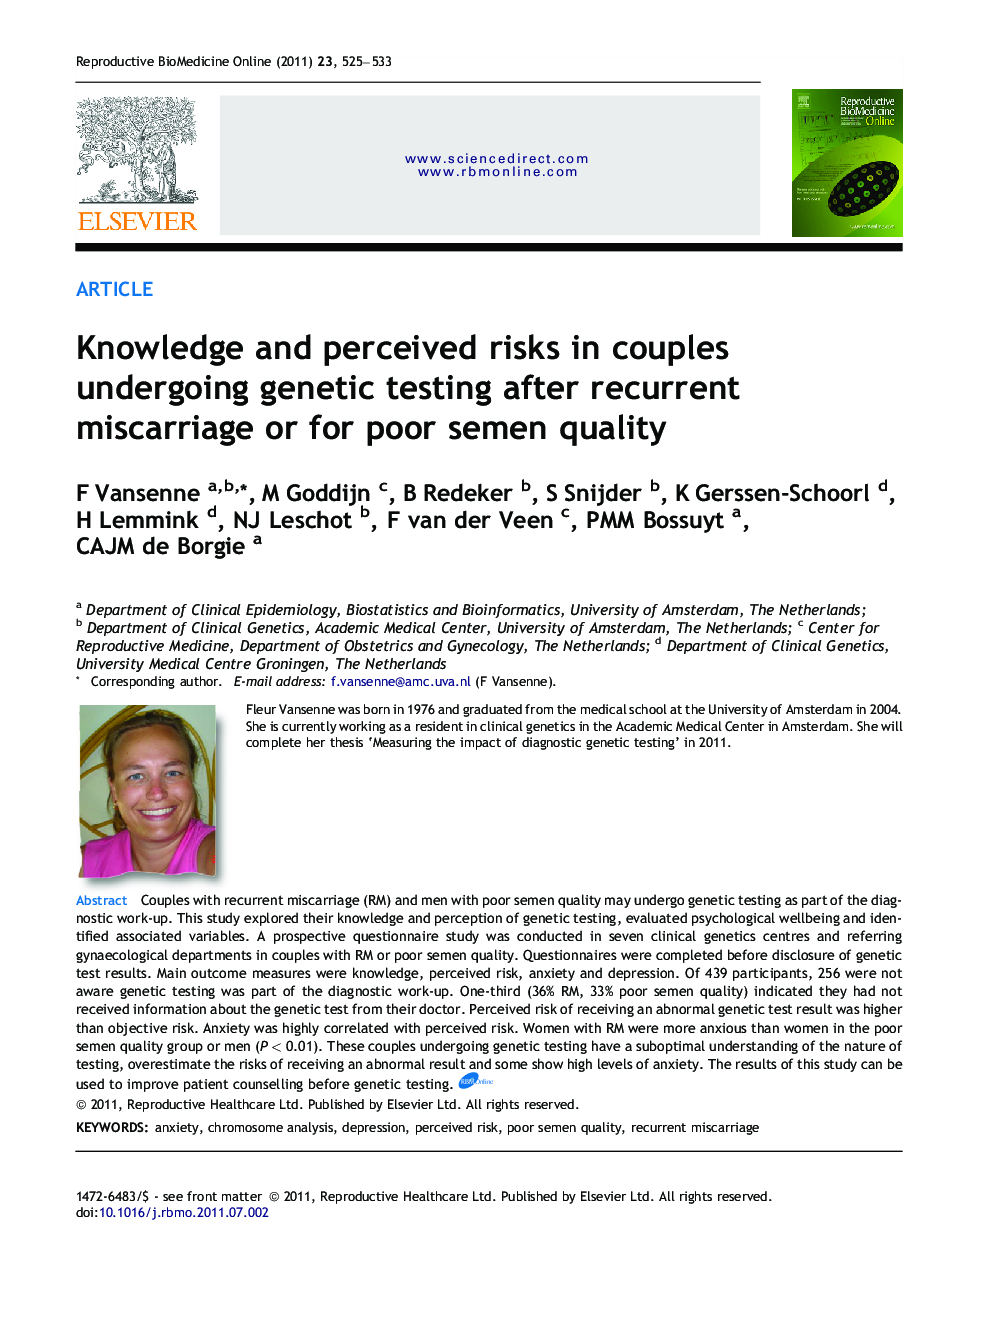 Knowledge and perceived risks in couples undergoing genetic testing after recurrent miscarriage or for poor semen quality 